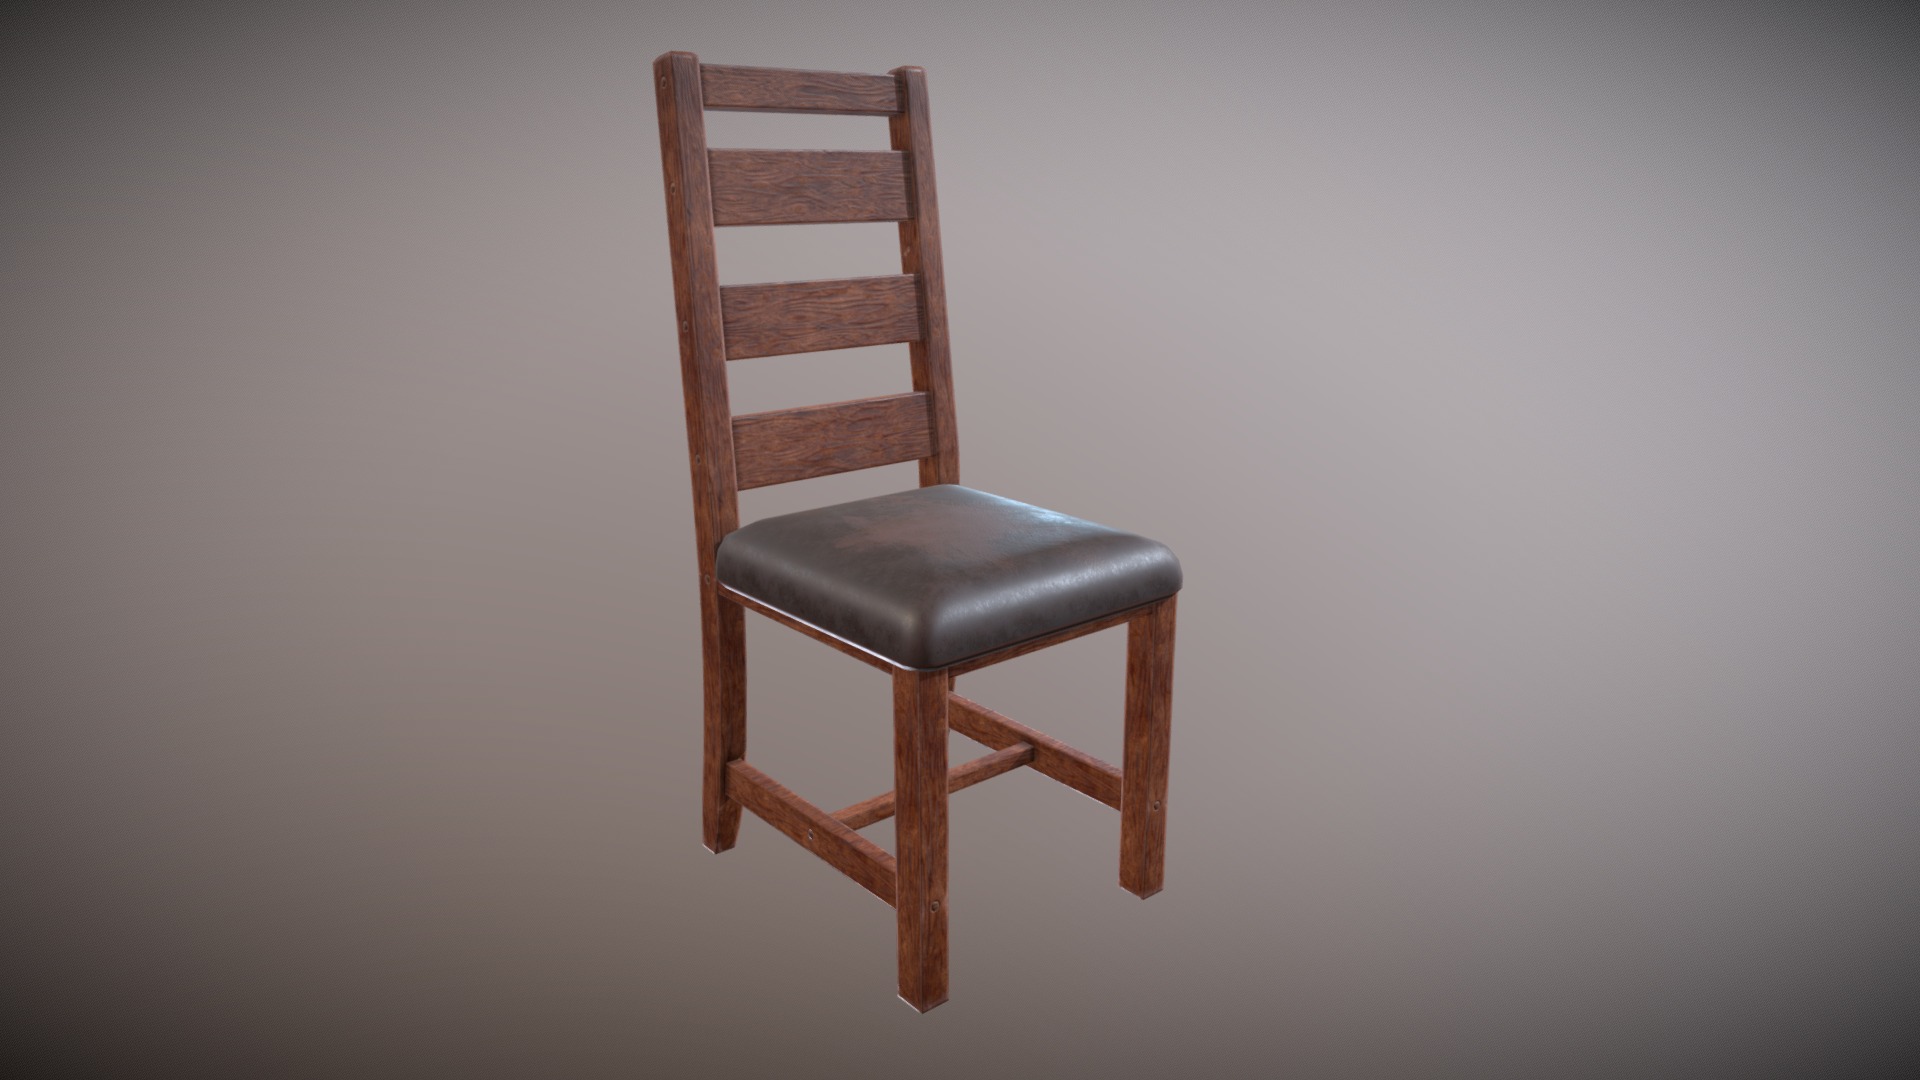 3D model Wood Dining Chair - This is a 3D model of the Wood Dining Chair. The 3D model is about a wooden chair against a white wall.